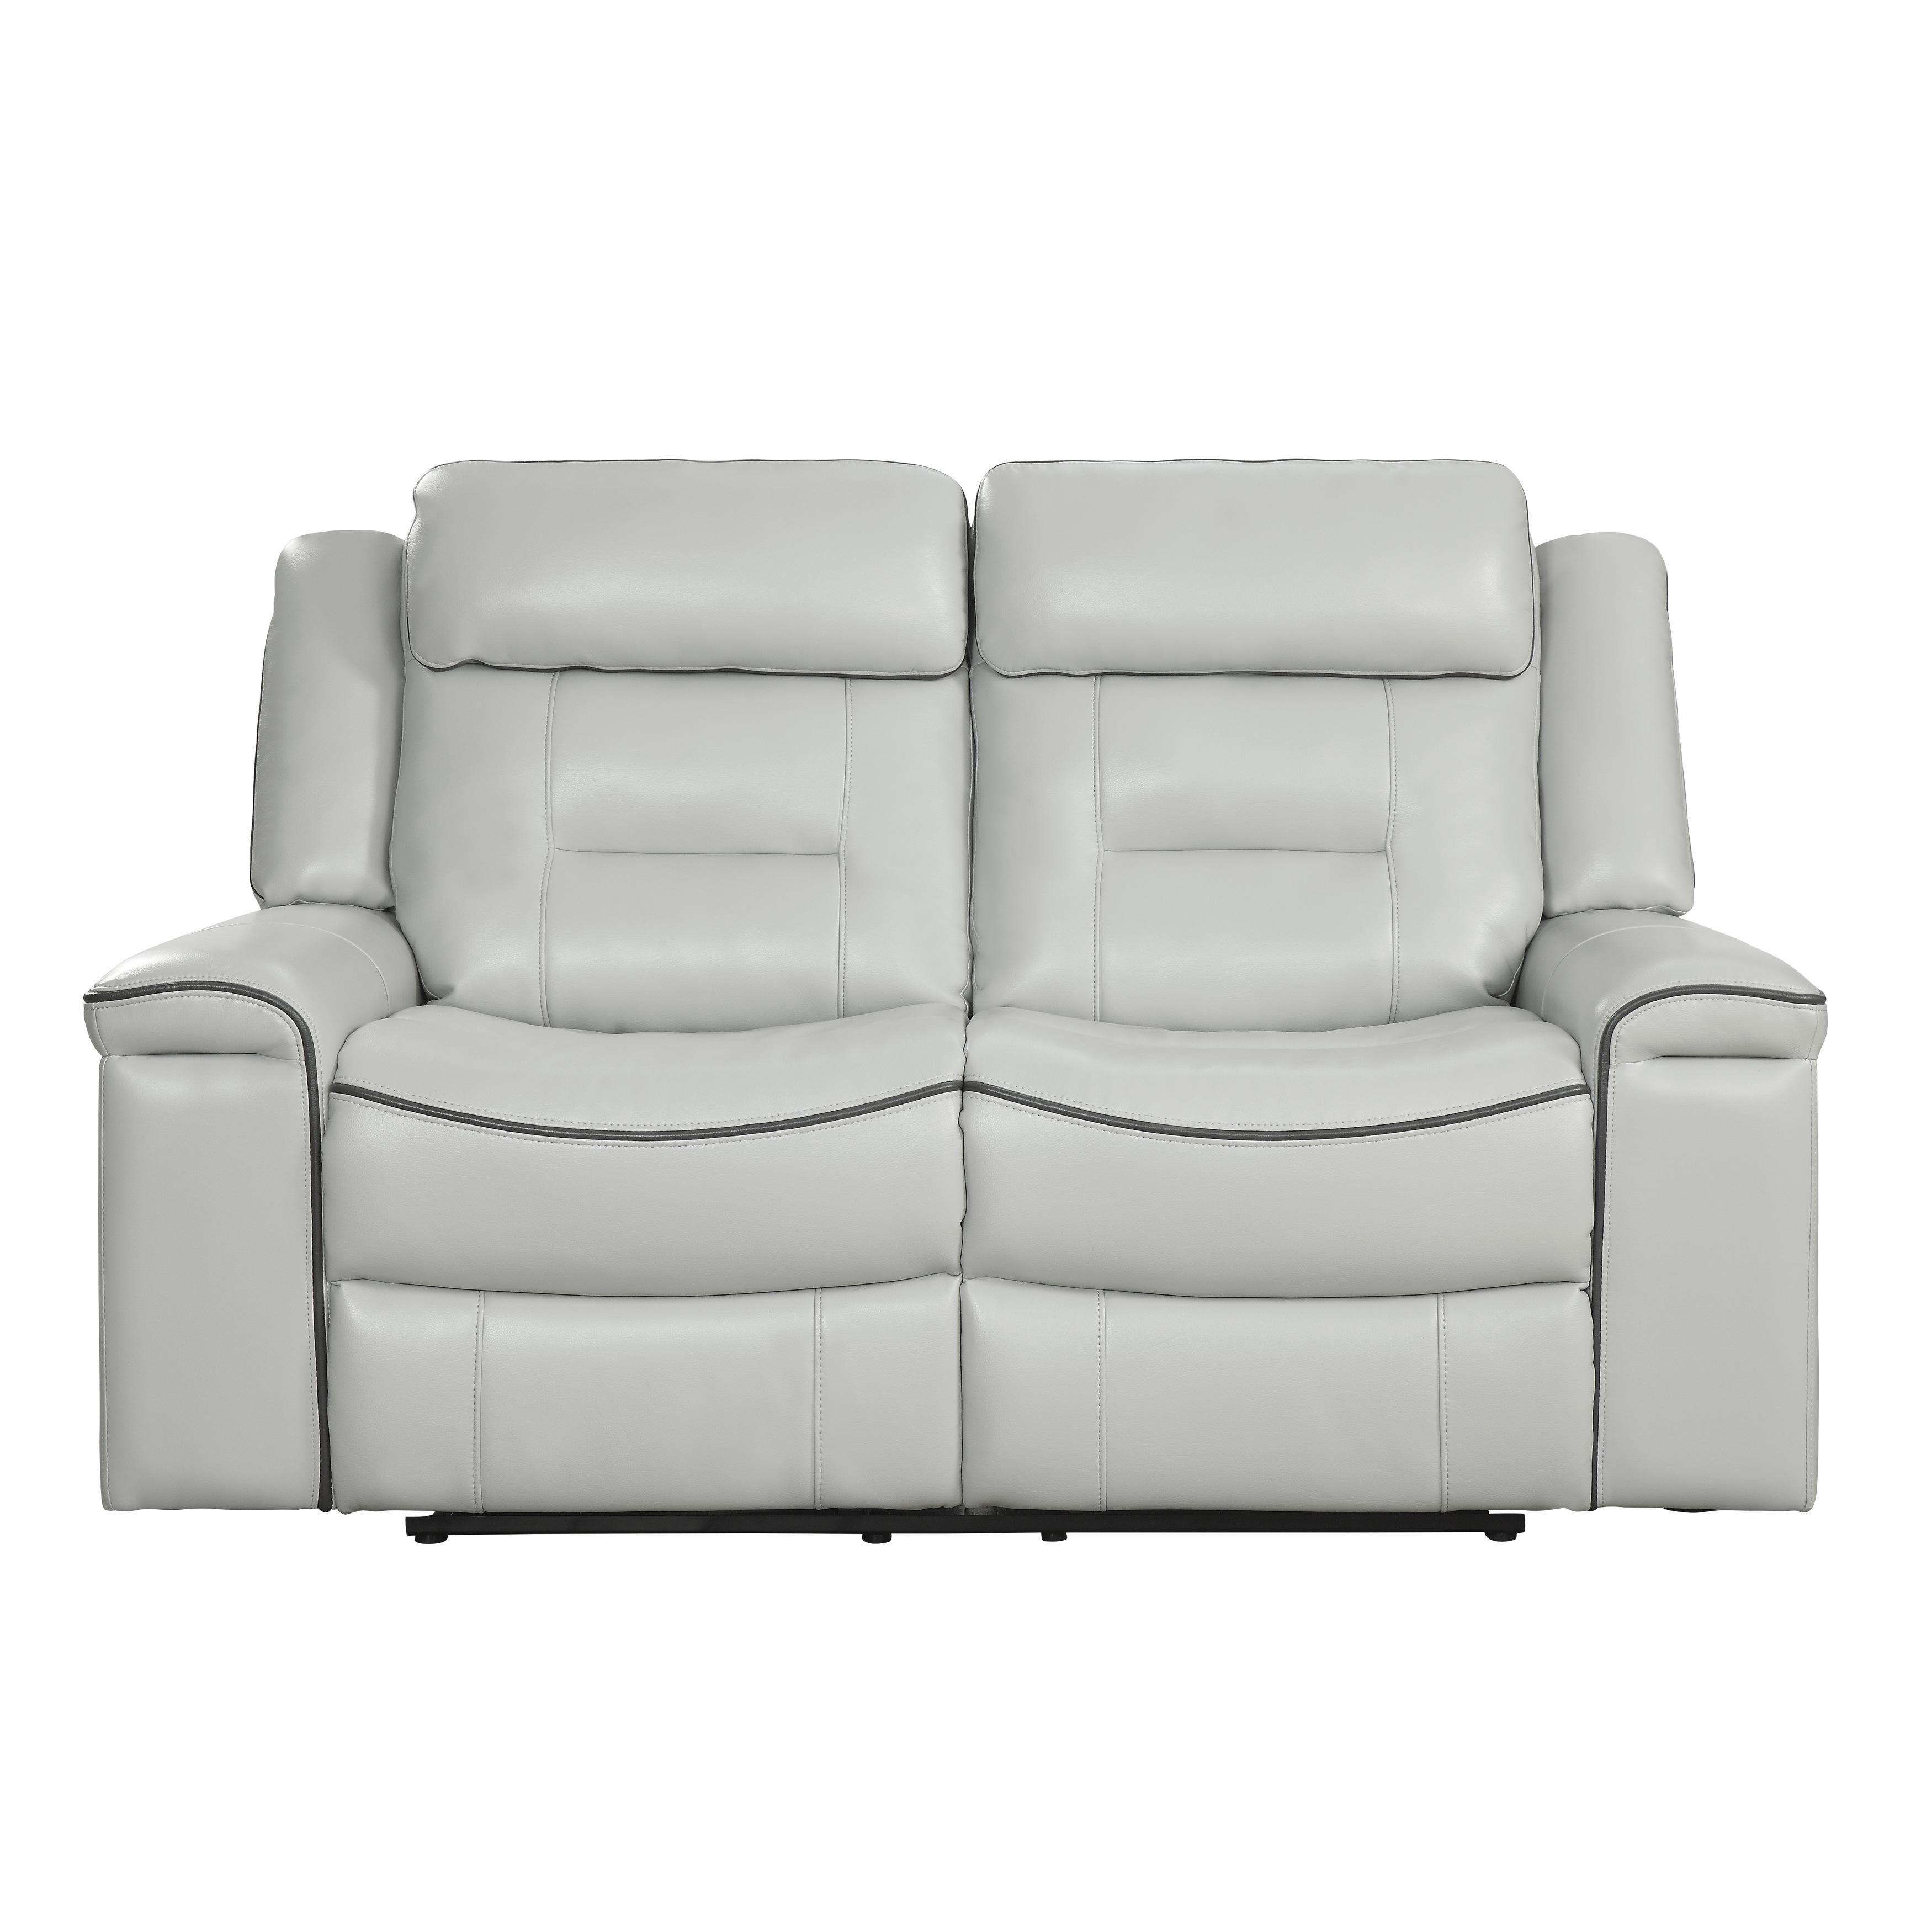 

    
Contemporary Light Gray Faux Leather Reclining Loveseat Homelegance 9999GY-2 Darwan
